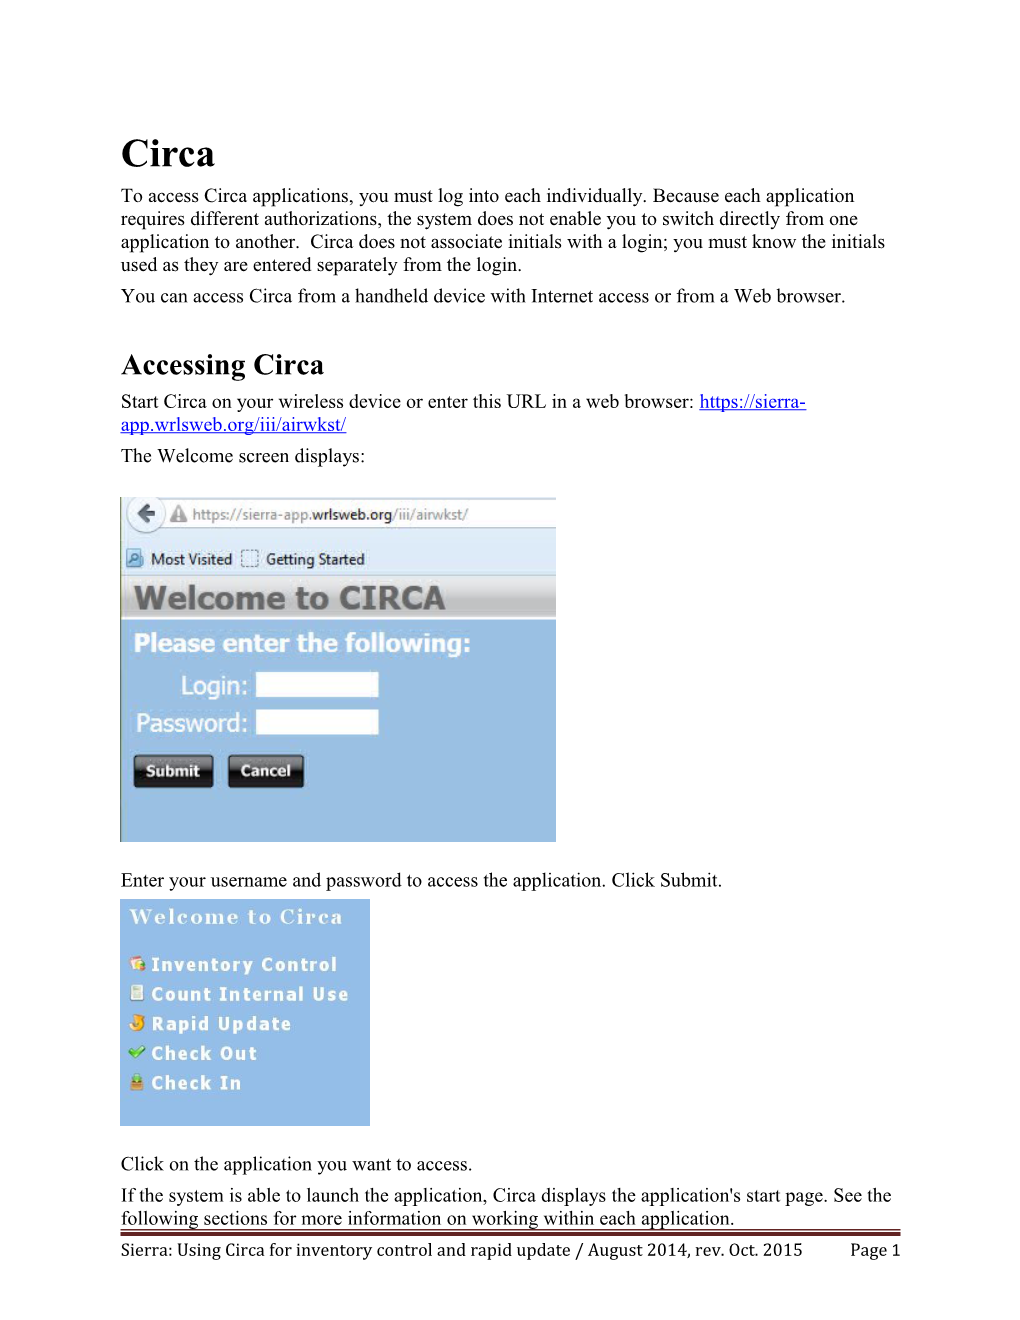 You Can Access Circa from a Handheld Device with Internet Access Or from a Web Browser